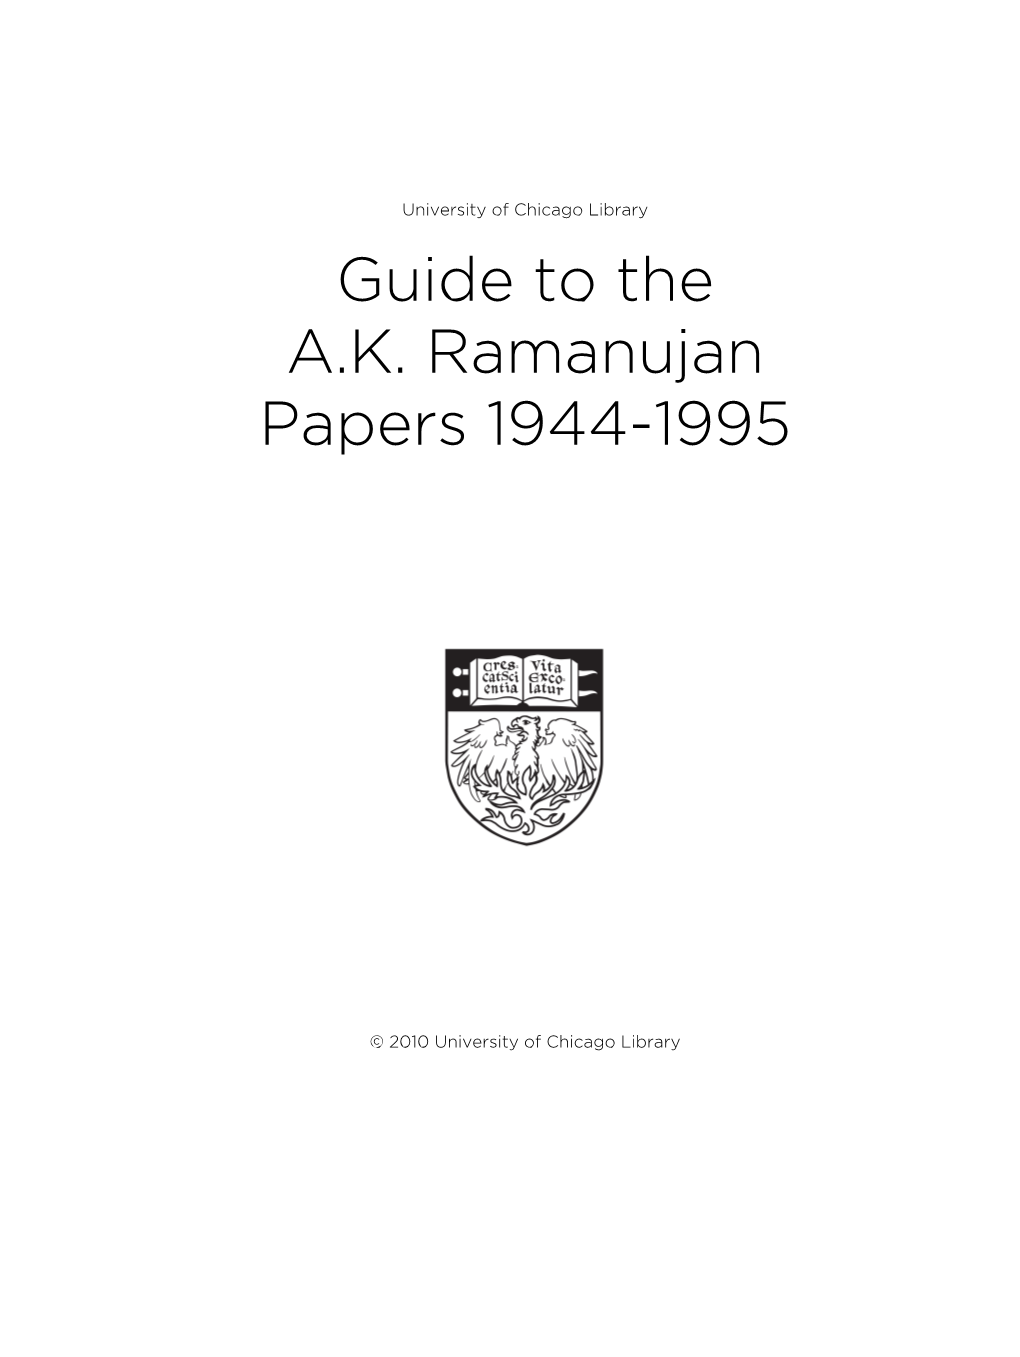 Guide to the A.K. Ramanujan Papers 1944-1995